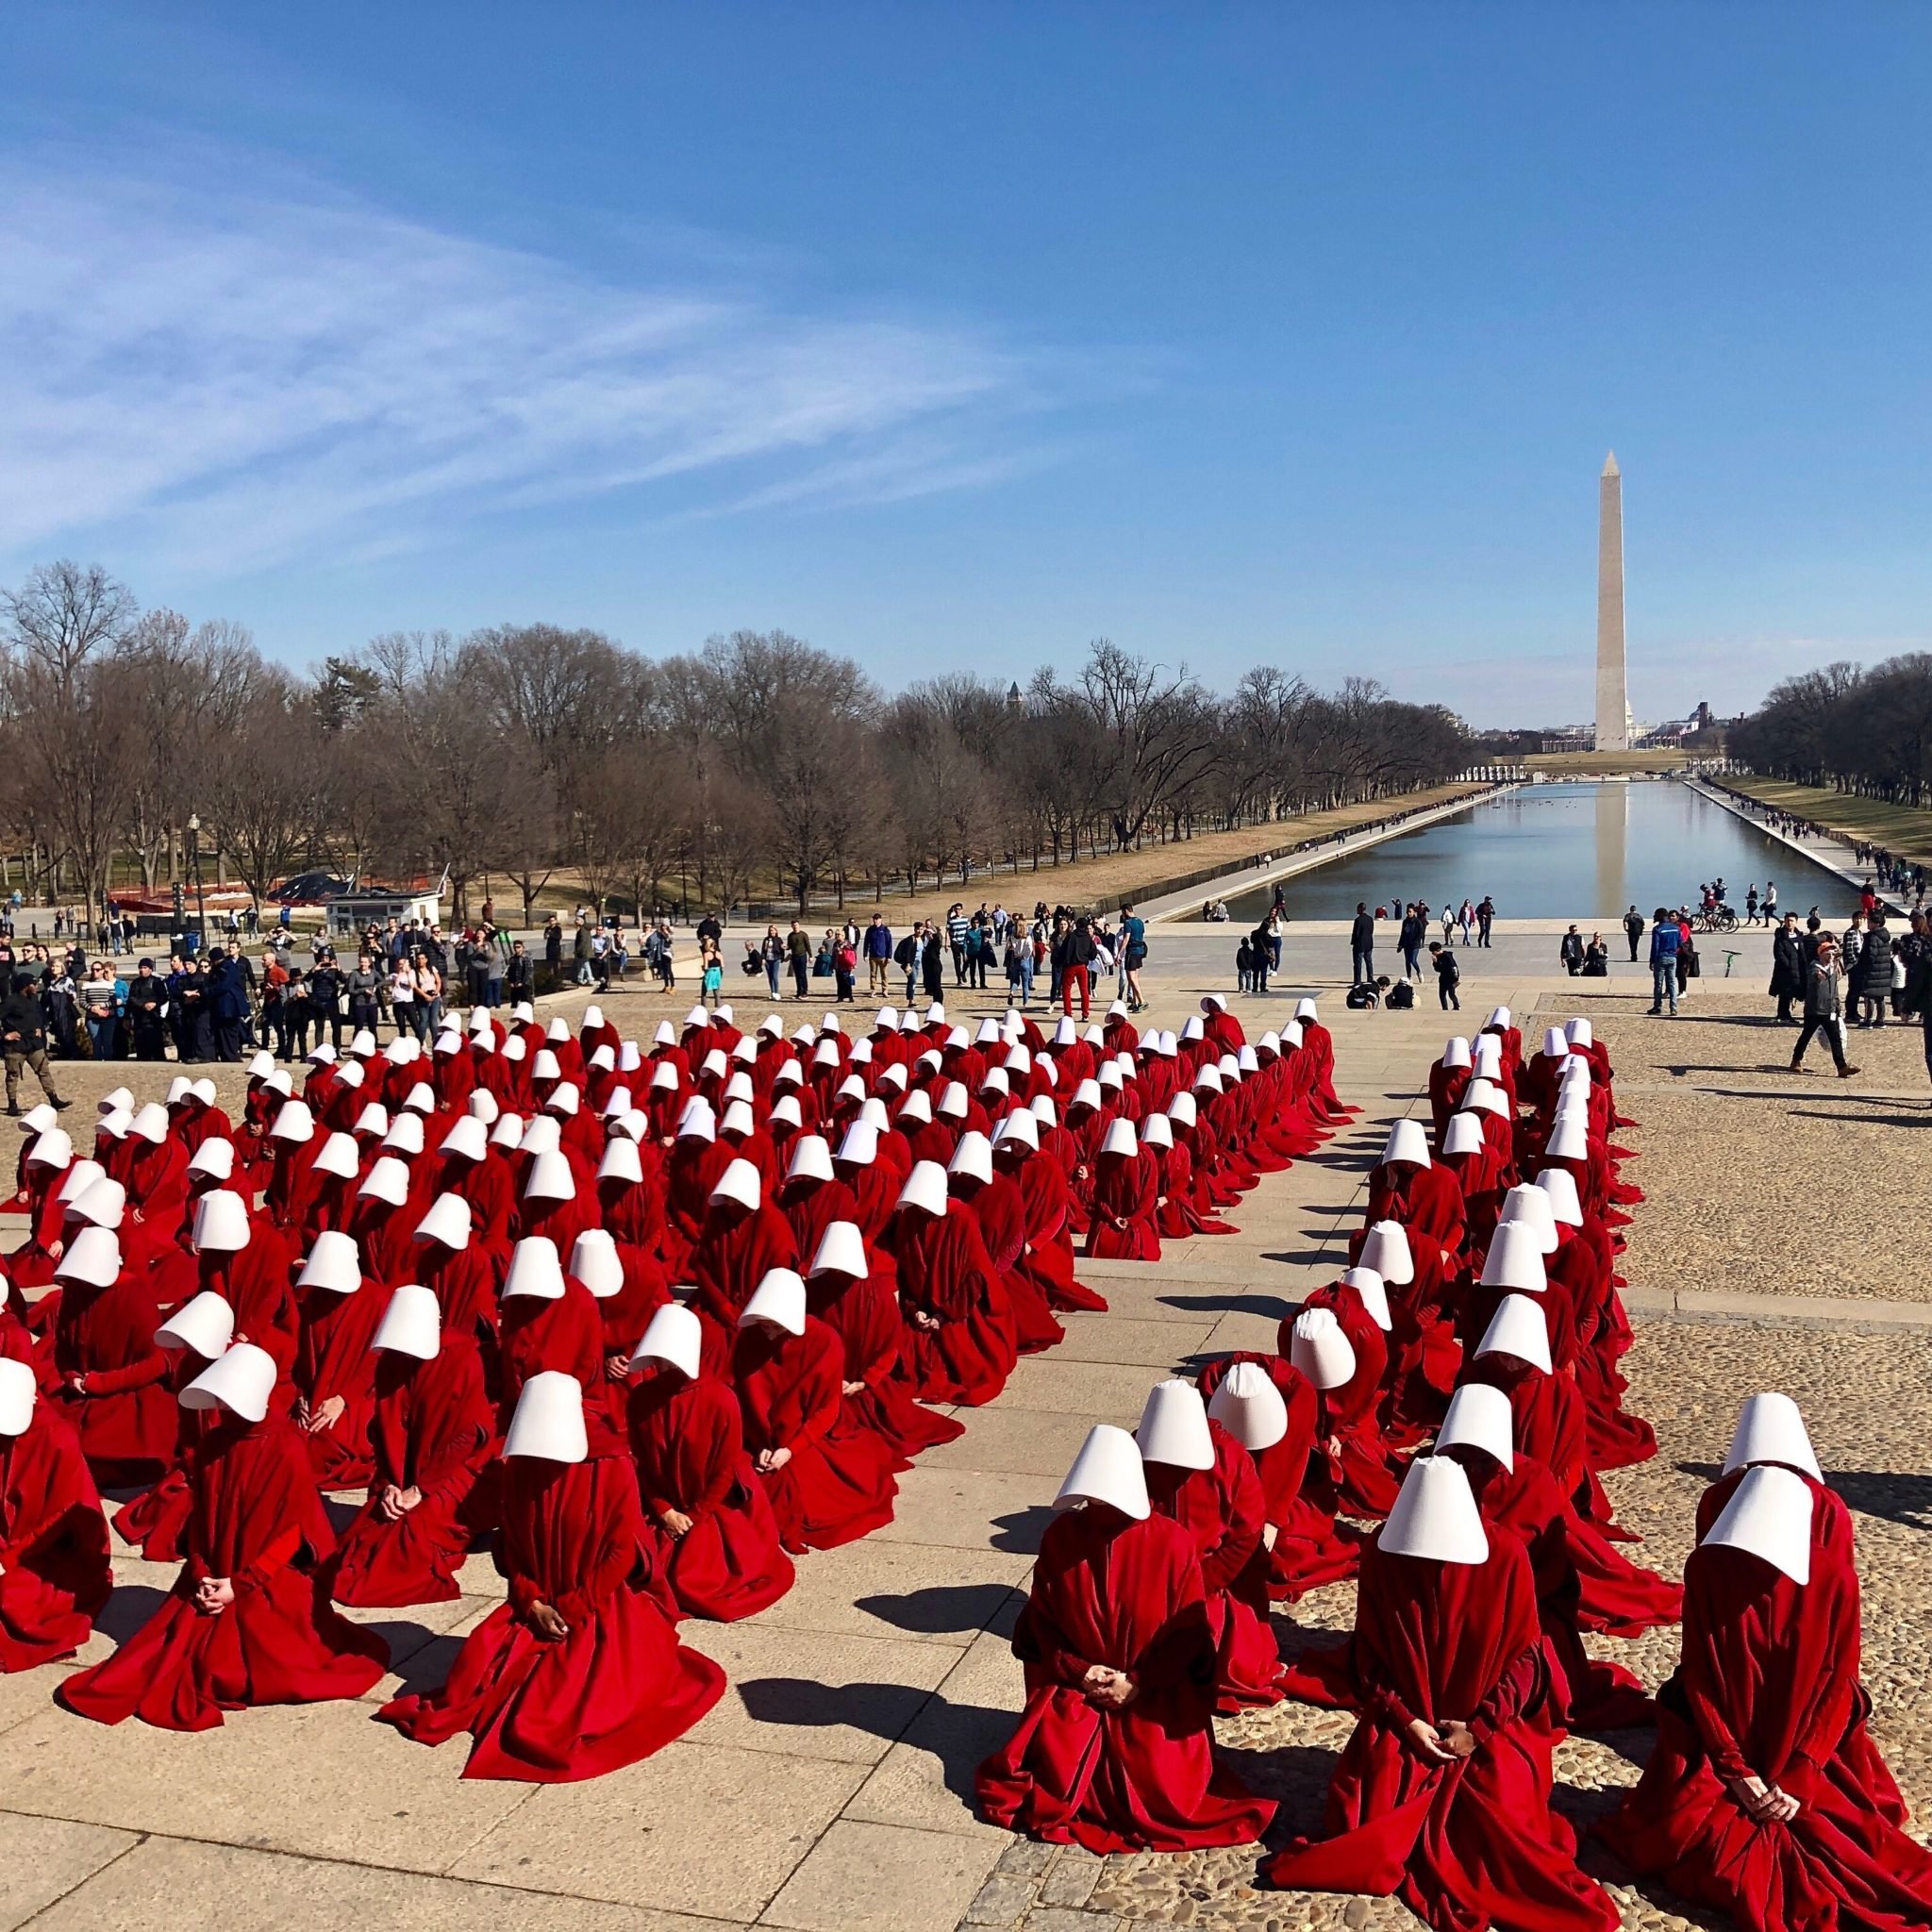 “The Handmaid’s Tale” Is Filming on the National Mall and the Photos are Kinda Intense